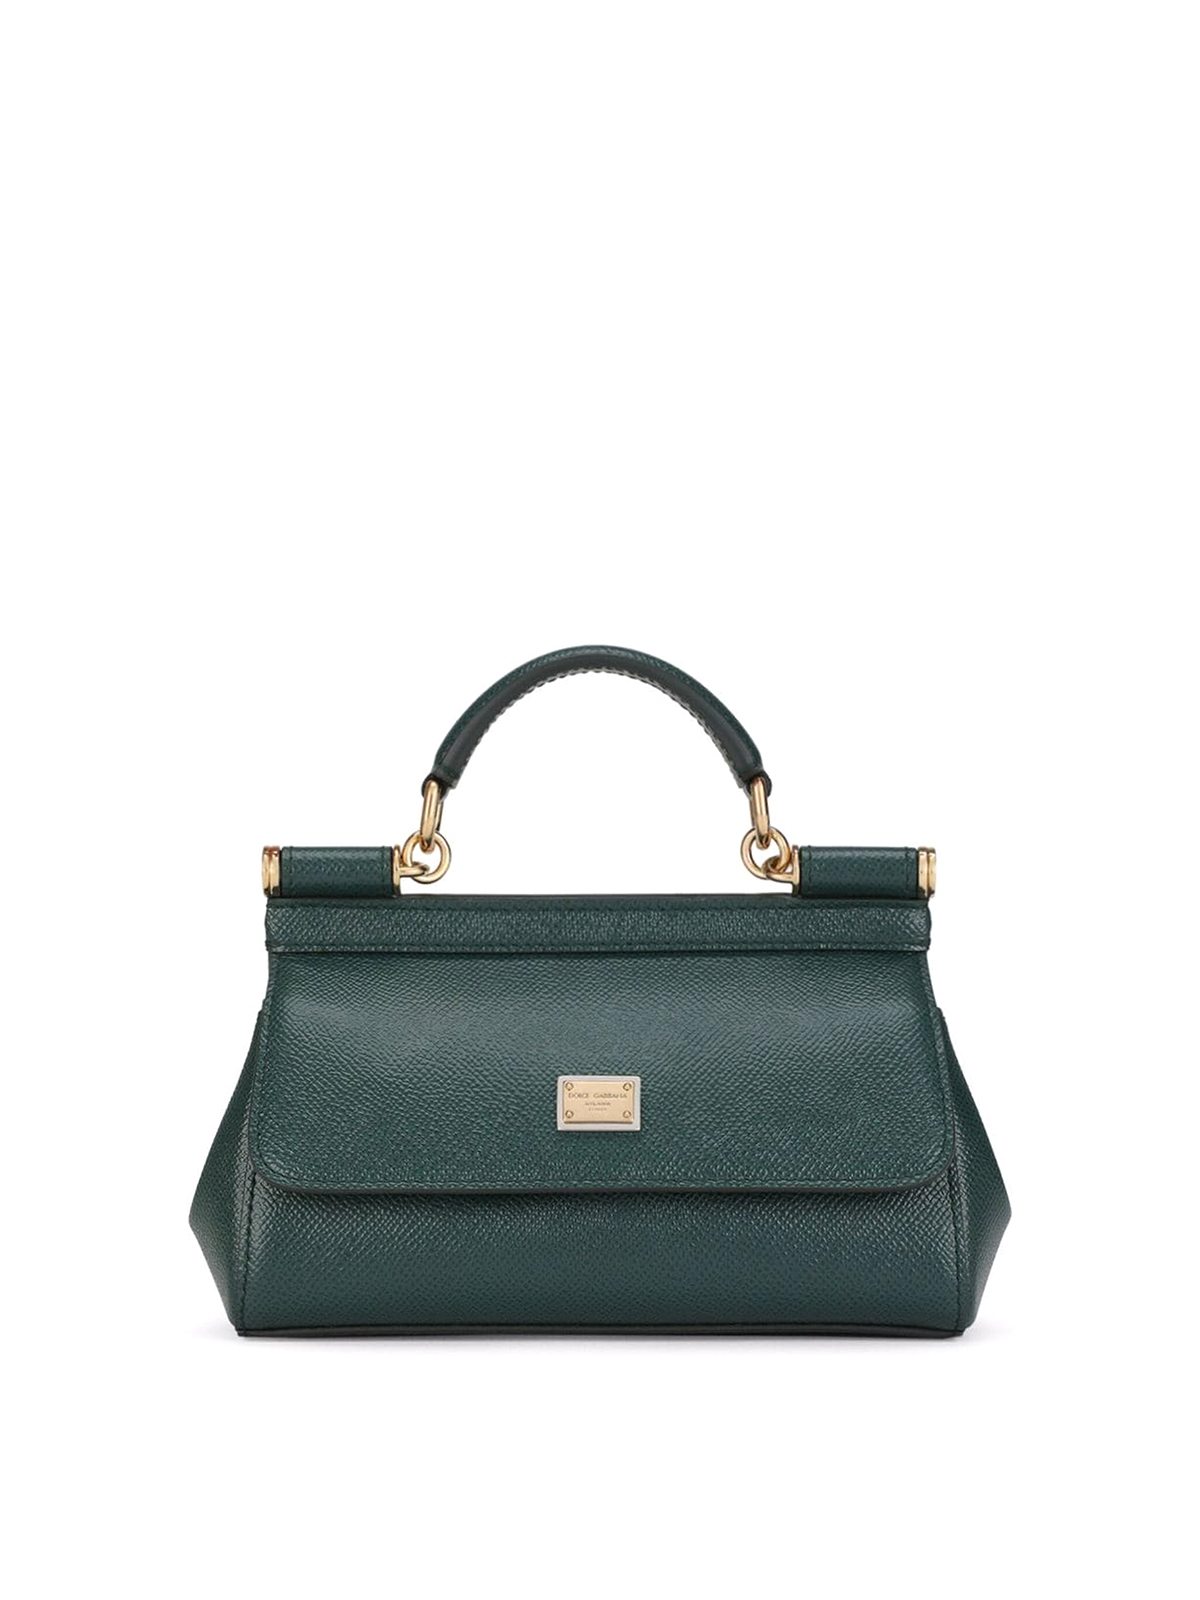 Dolce & Gabbana Sicily Small Dauphine Leather Bag In Green